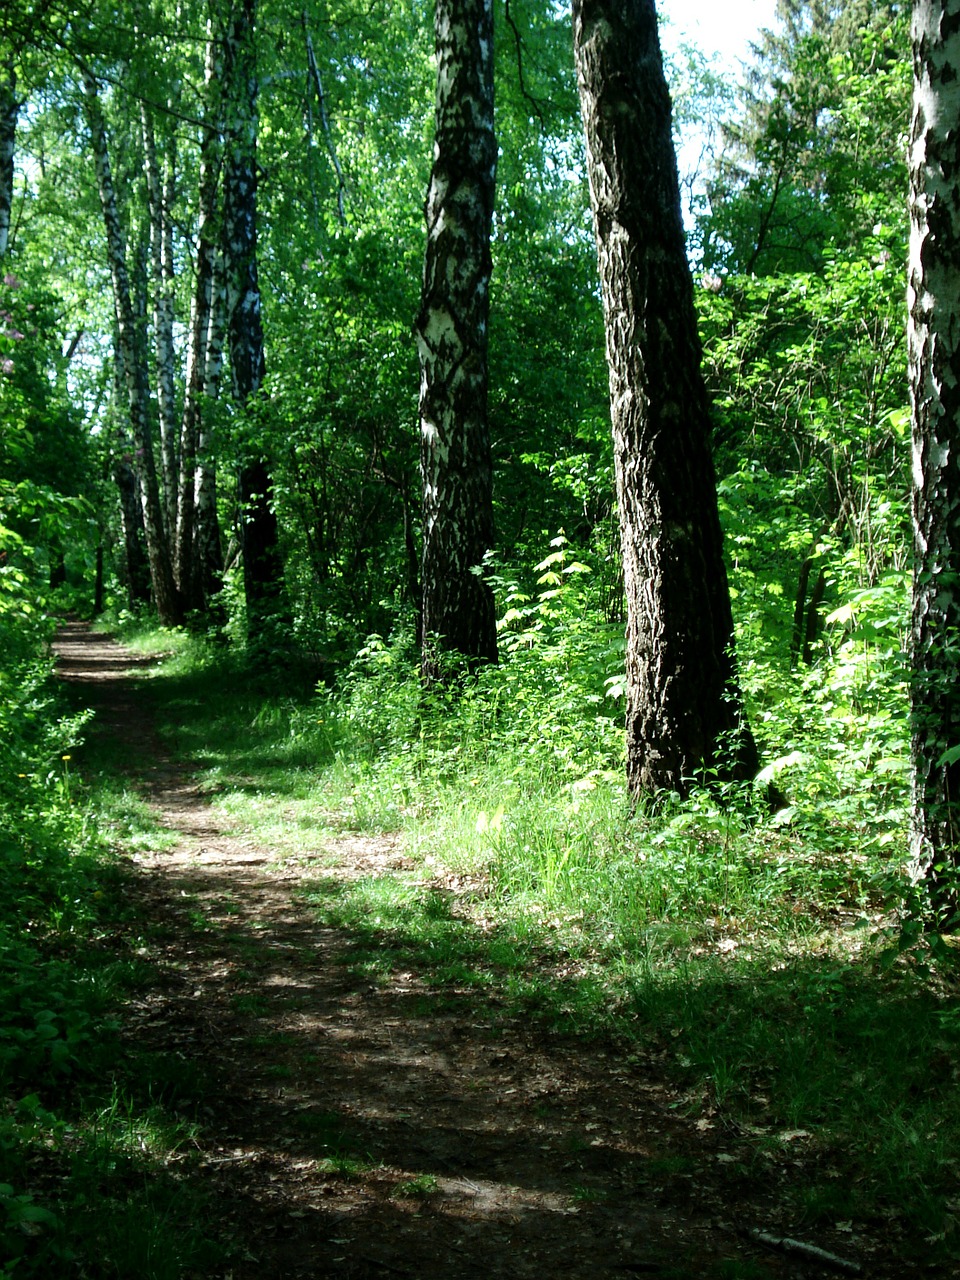 Landscape,nature,footpath,walkway,forest path - free image from needpix.com